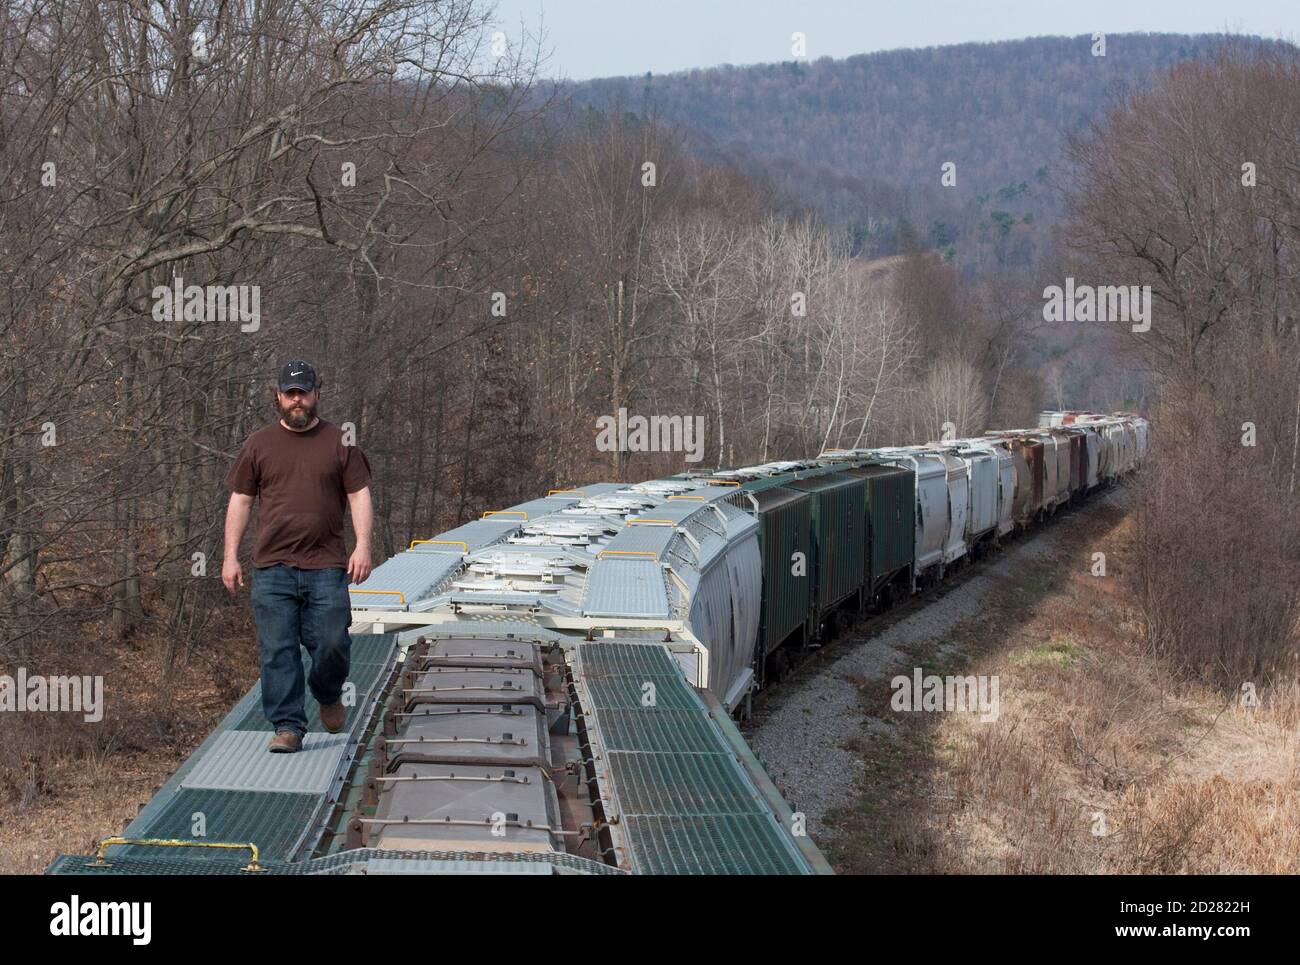 Chief Operating Officer of Wellsboro & Corning Railroad Bill Myles examines the end of a 75-car train carrying sand that his company transloads for energy companies drilling natural gas wells in Wellsboro, Pennsylvania April 3, 2010. The booming natural gas industry, which uses the sand in hydraulic fracturing operations, has led to an economic revival of the businesses and towns that support it. Picture taken April 3, 2010. REUTERS/Adam Fenster  (UNITED STATES - Tags: ENERGY TRANSPORT BUSINESS) Stock Photo